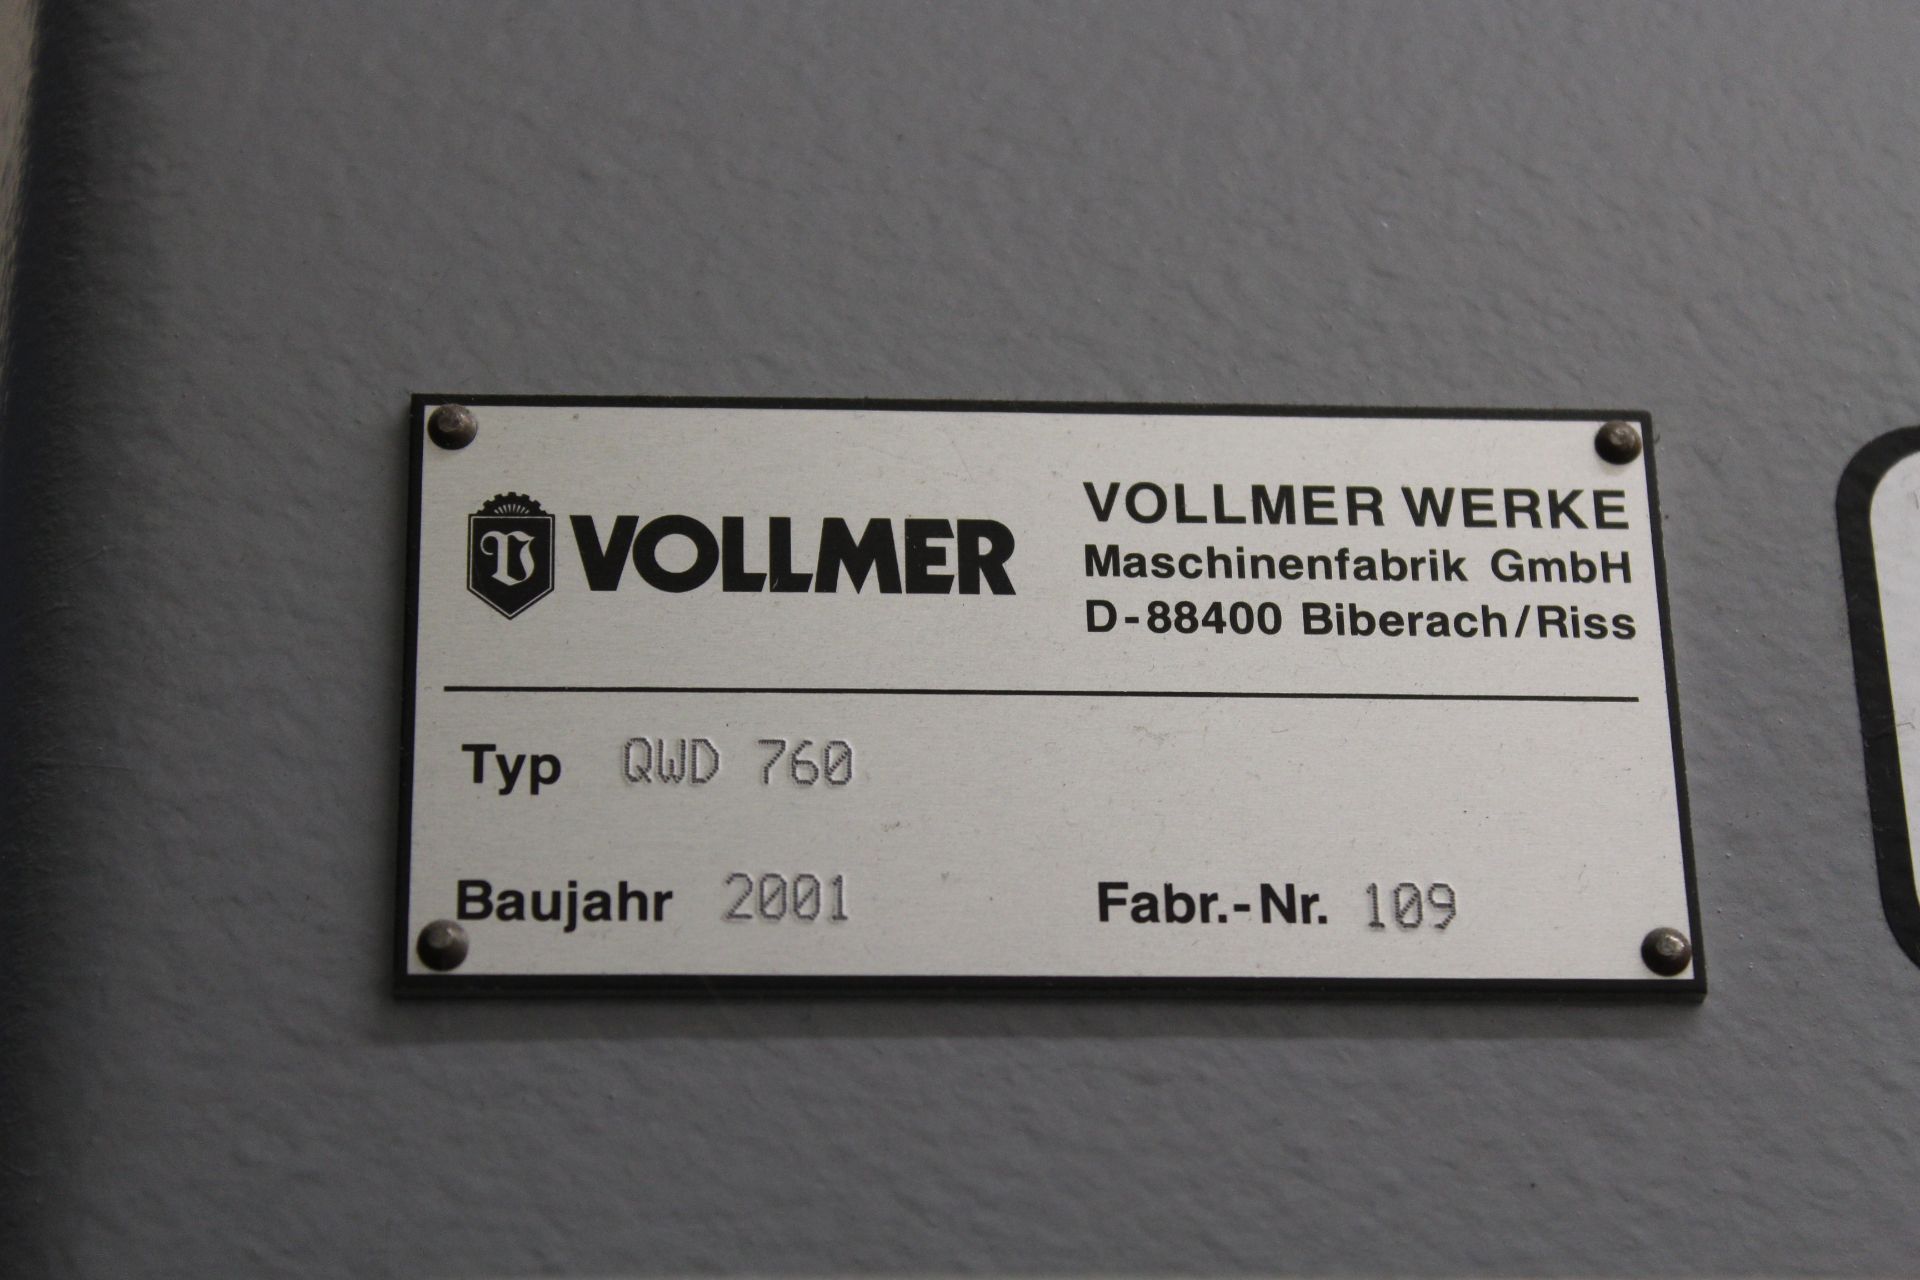 Vollmer QWD 760 5 axis horizontal wire cut EDM machine, Serial No. 109 (2001) weight: 4,600 kg, - Image 9 of 15